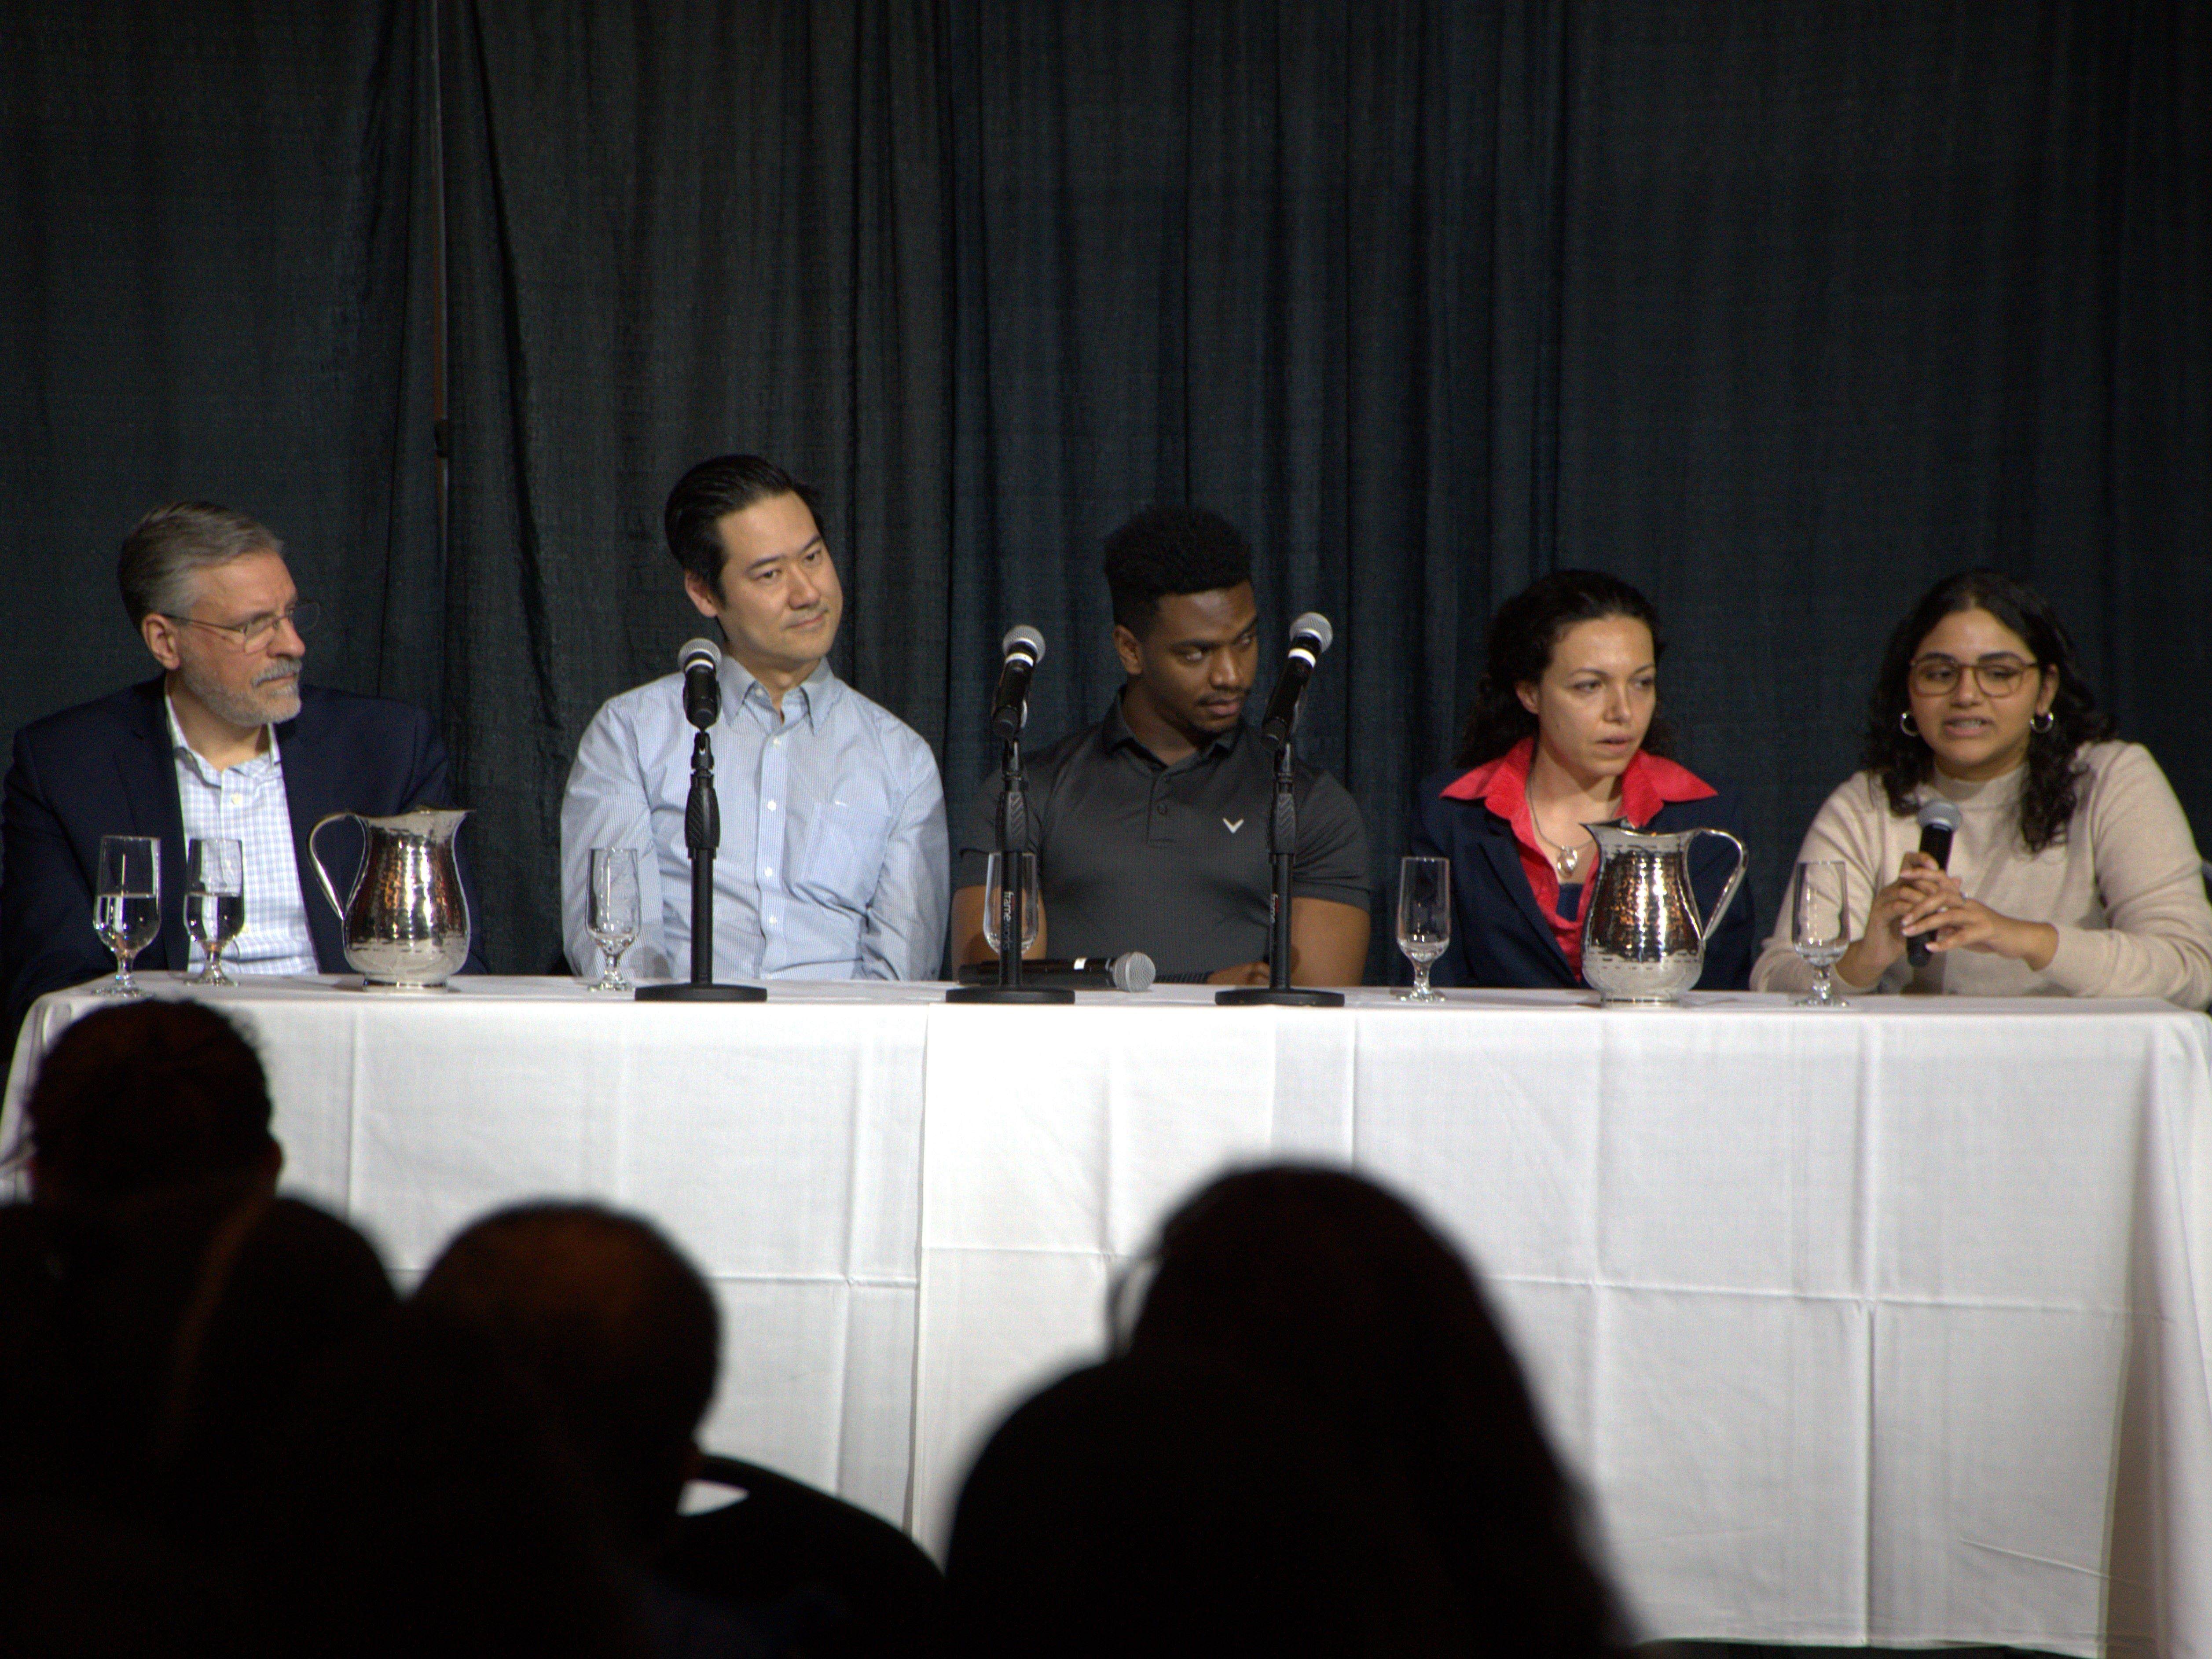 Photo of the five panelists sitting at a table on the stage